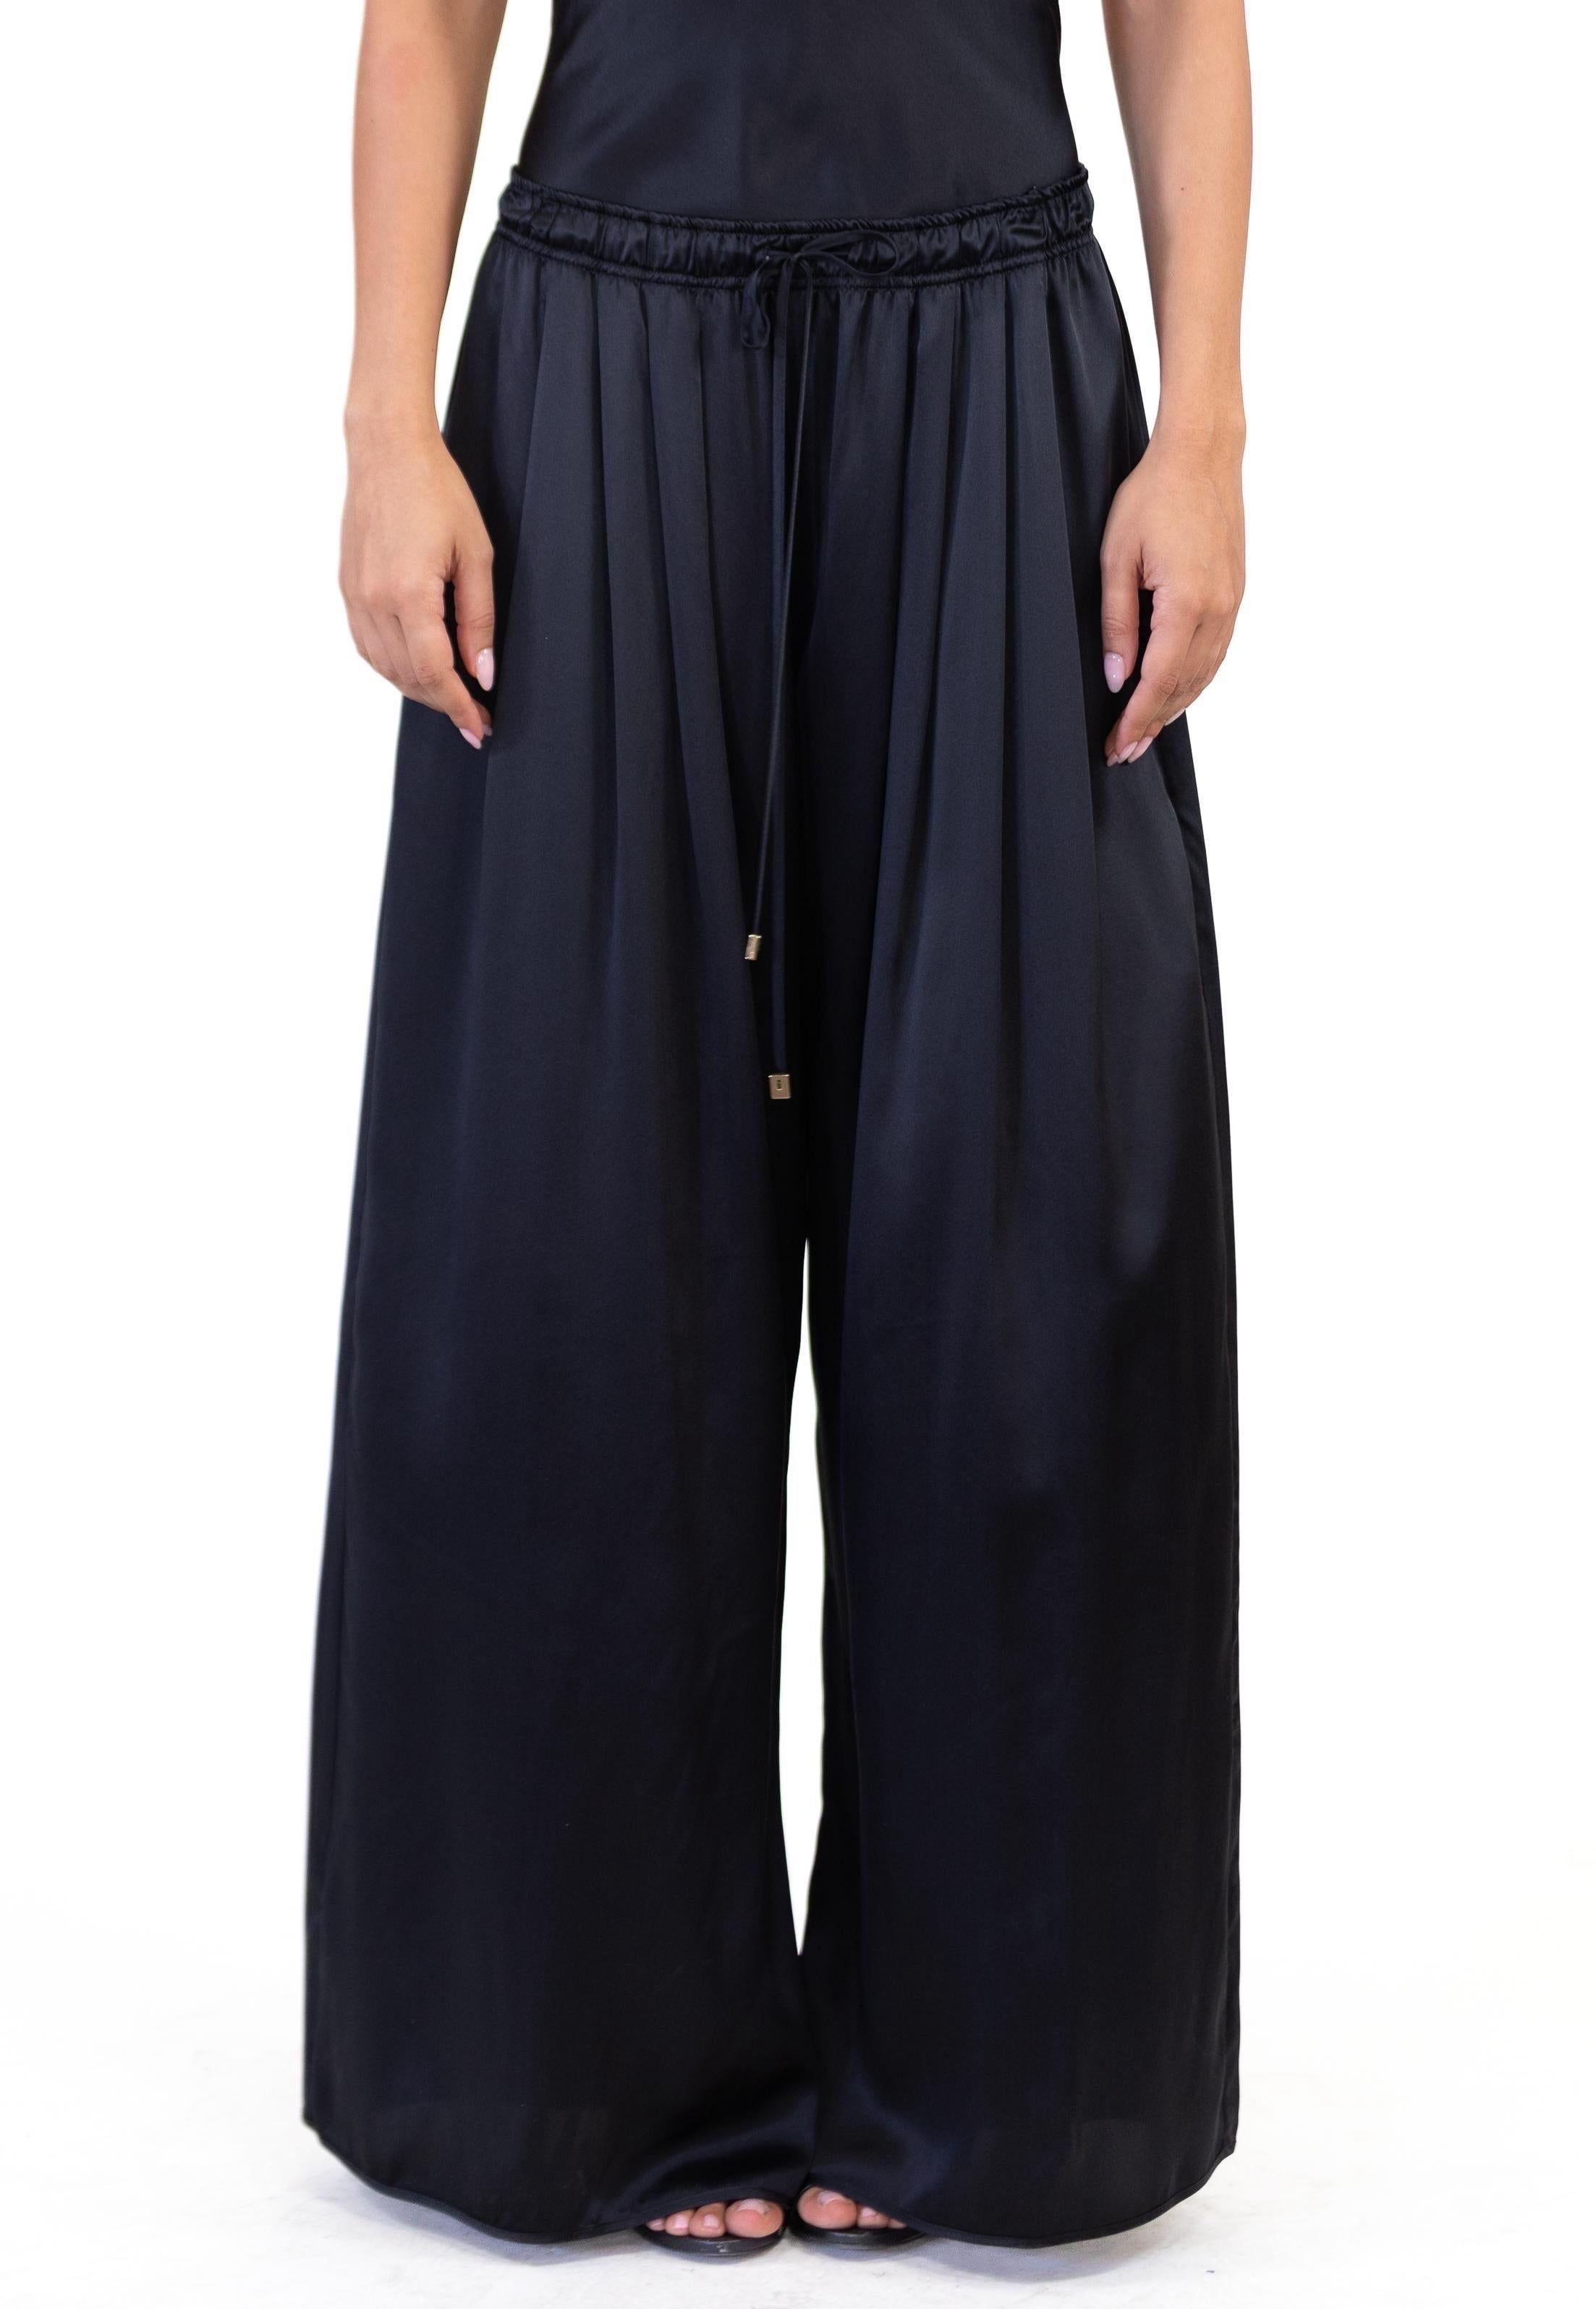 MORPHEW COLLECTION Black Silk Charmeuse Oversized Box Pleat Pants
MORPHEW COLLECTION is made entirely by hand in our NYC Ateliér of rare antique materials sourced from around the globe. Our sustainable vintage materials represent over a century of